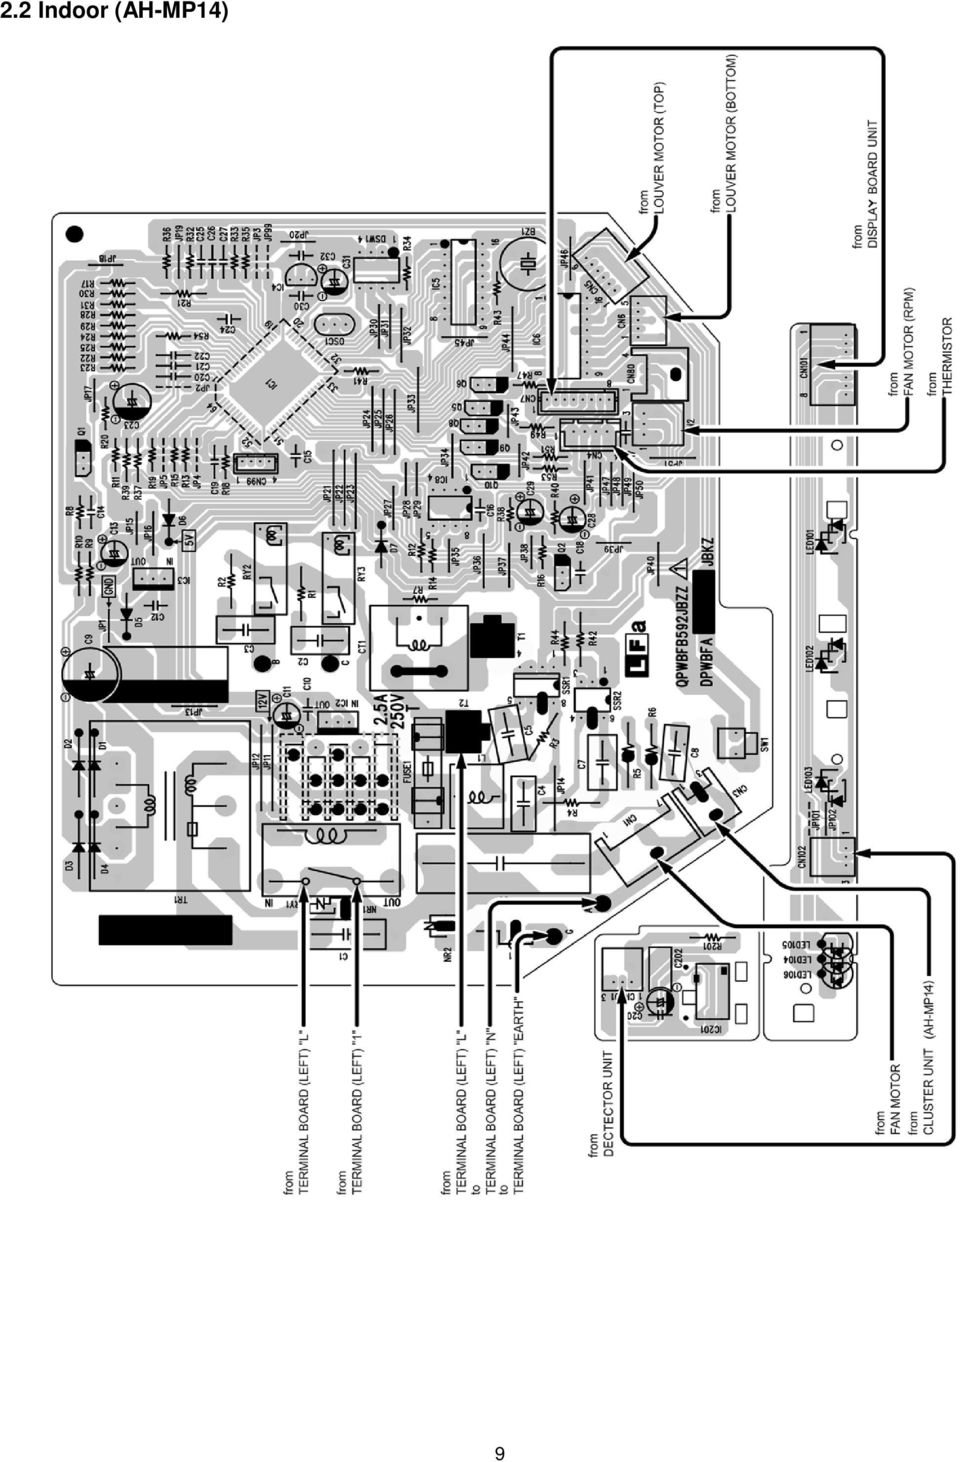 Honeywell Ct87N4450 Thermostat Wiring Diagram from wiringall.com